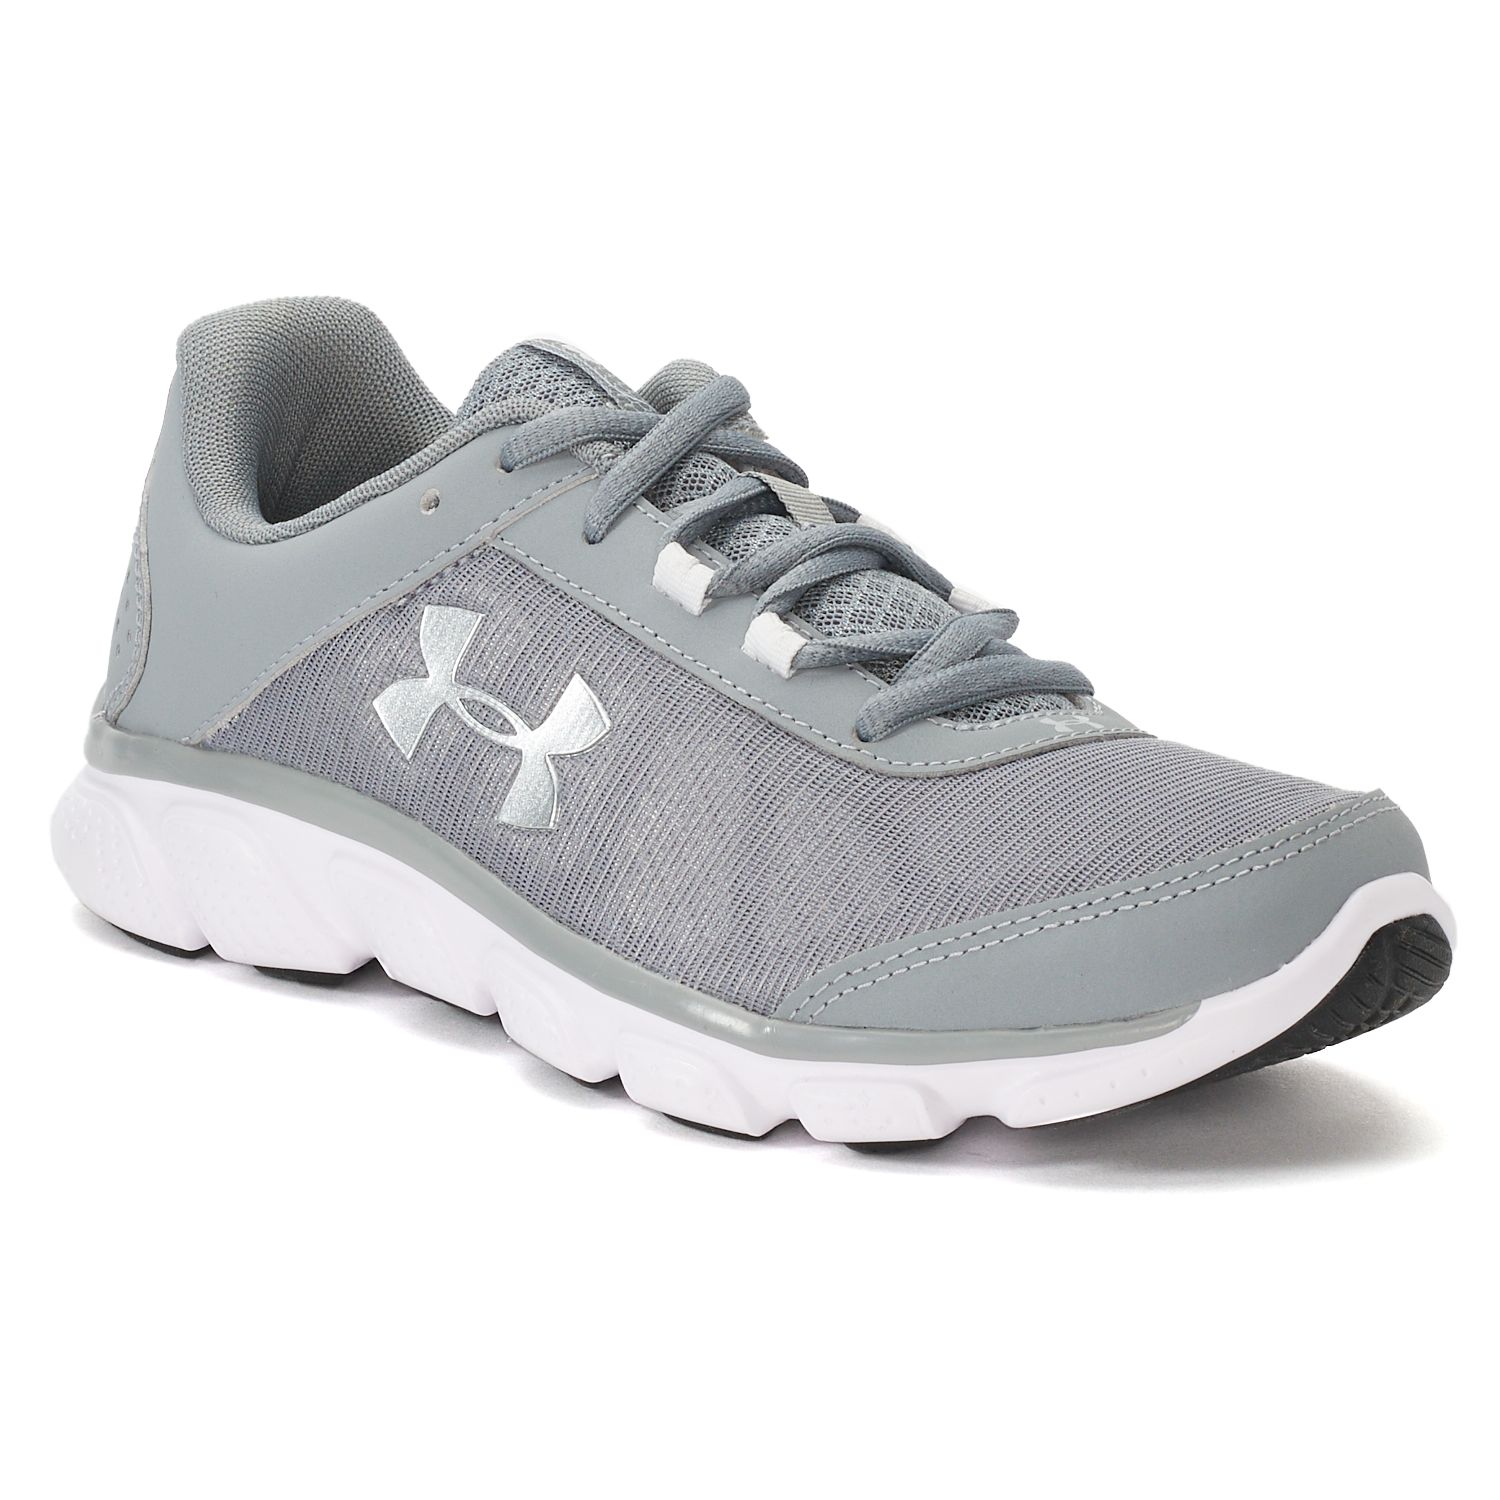 Under Armour UA Micro G Assert V Men's Trainers Running Shoes 1252295-038 